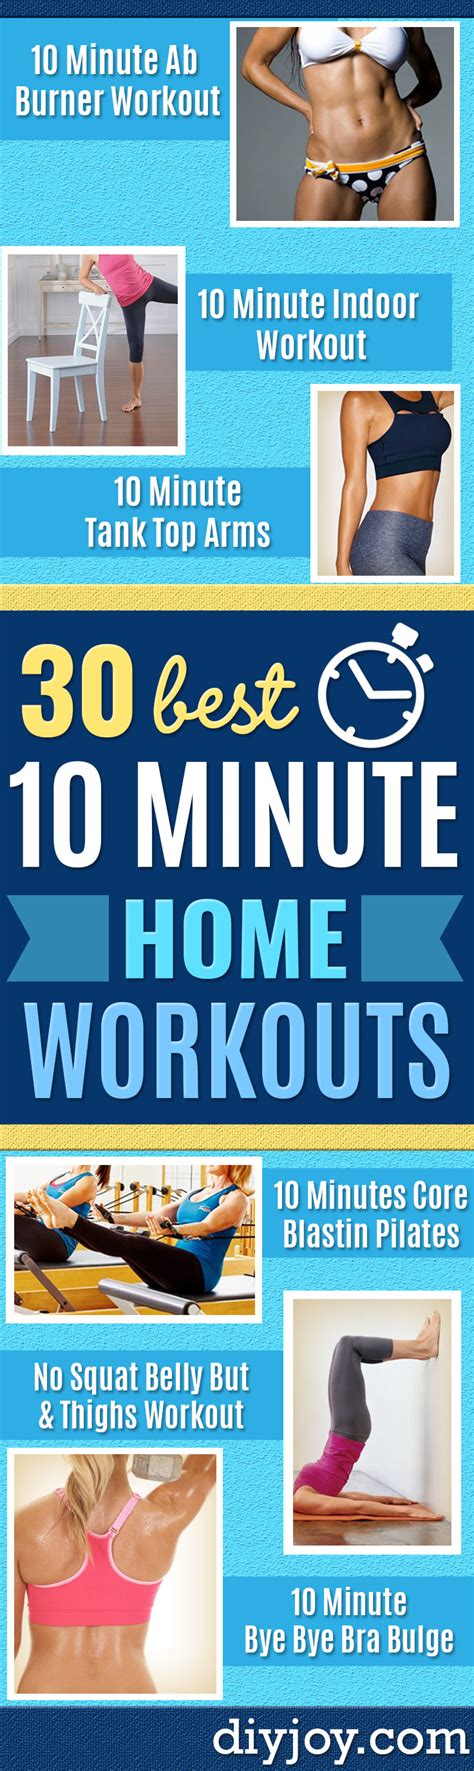 30 Ten Minute Workouts To Help Get In Shape Without Going To The Gym